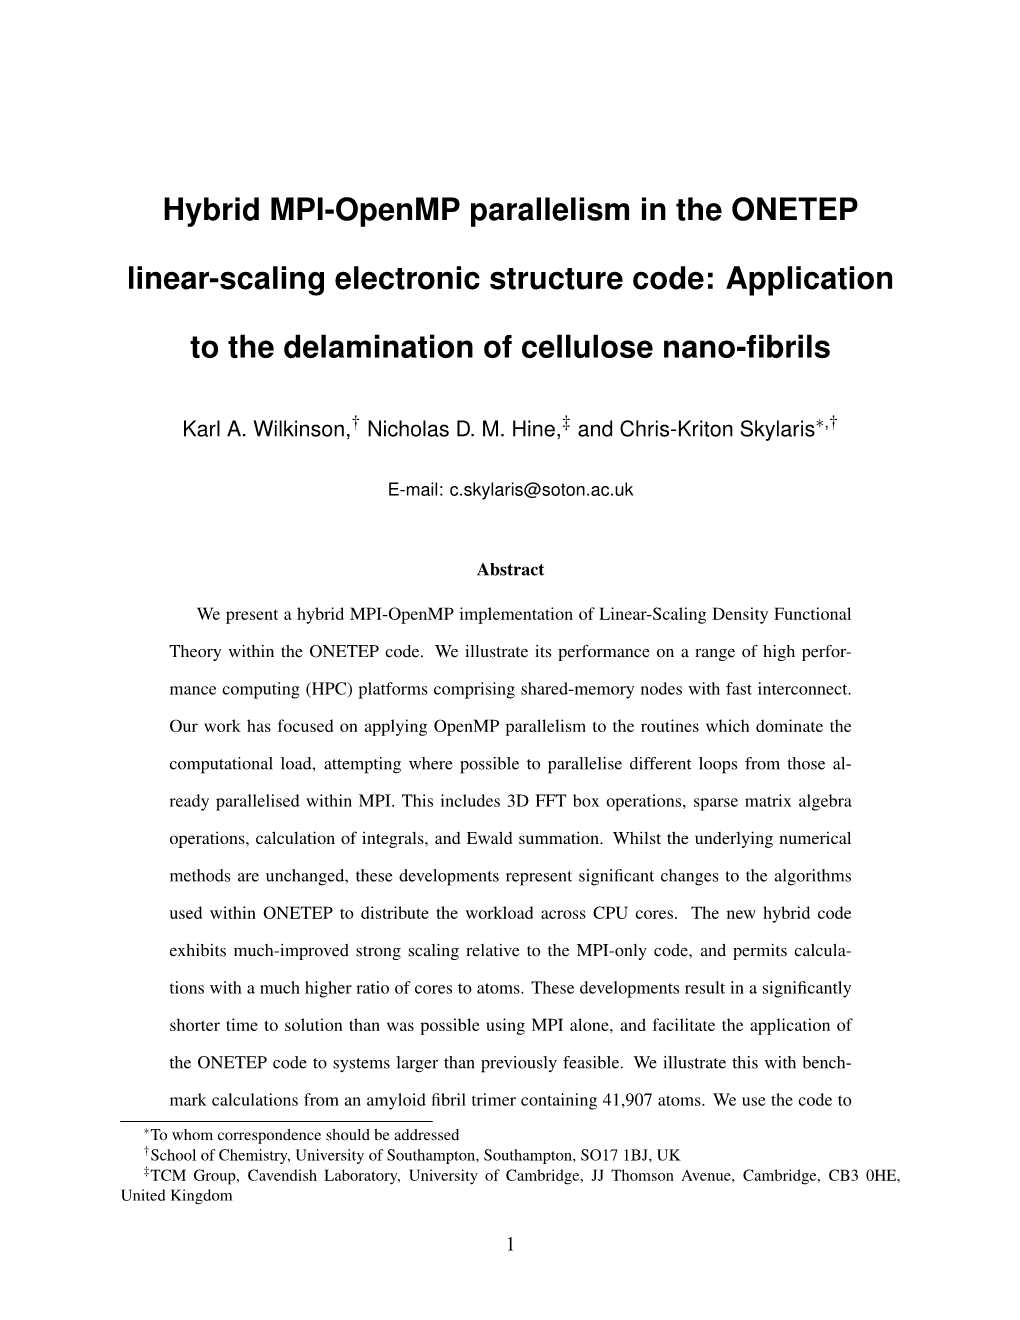 Hybrid MPI-Openmp Parallelism in the ONETEP Linear-Scaling Electronic